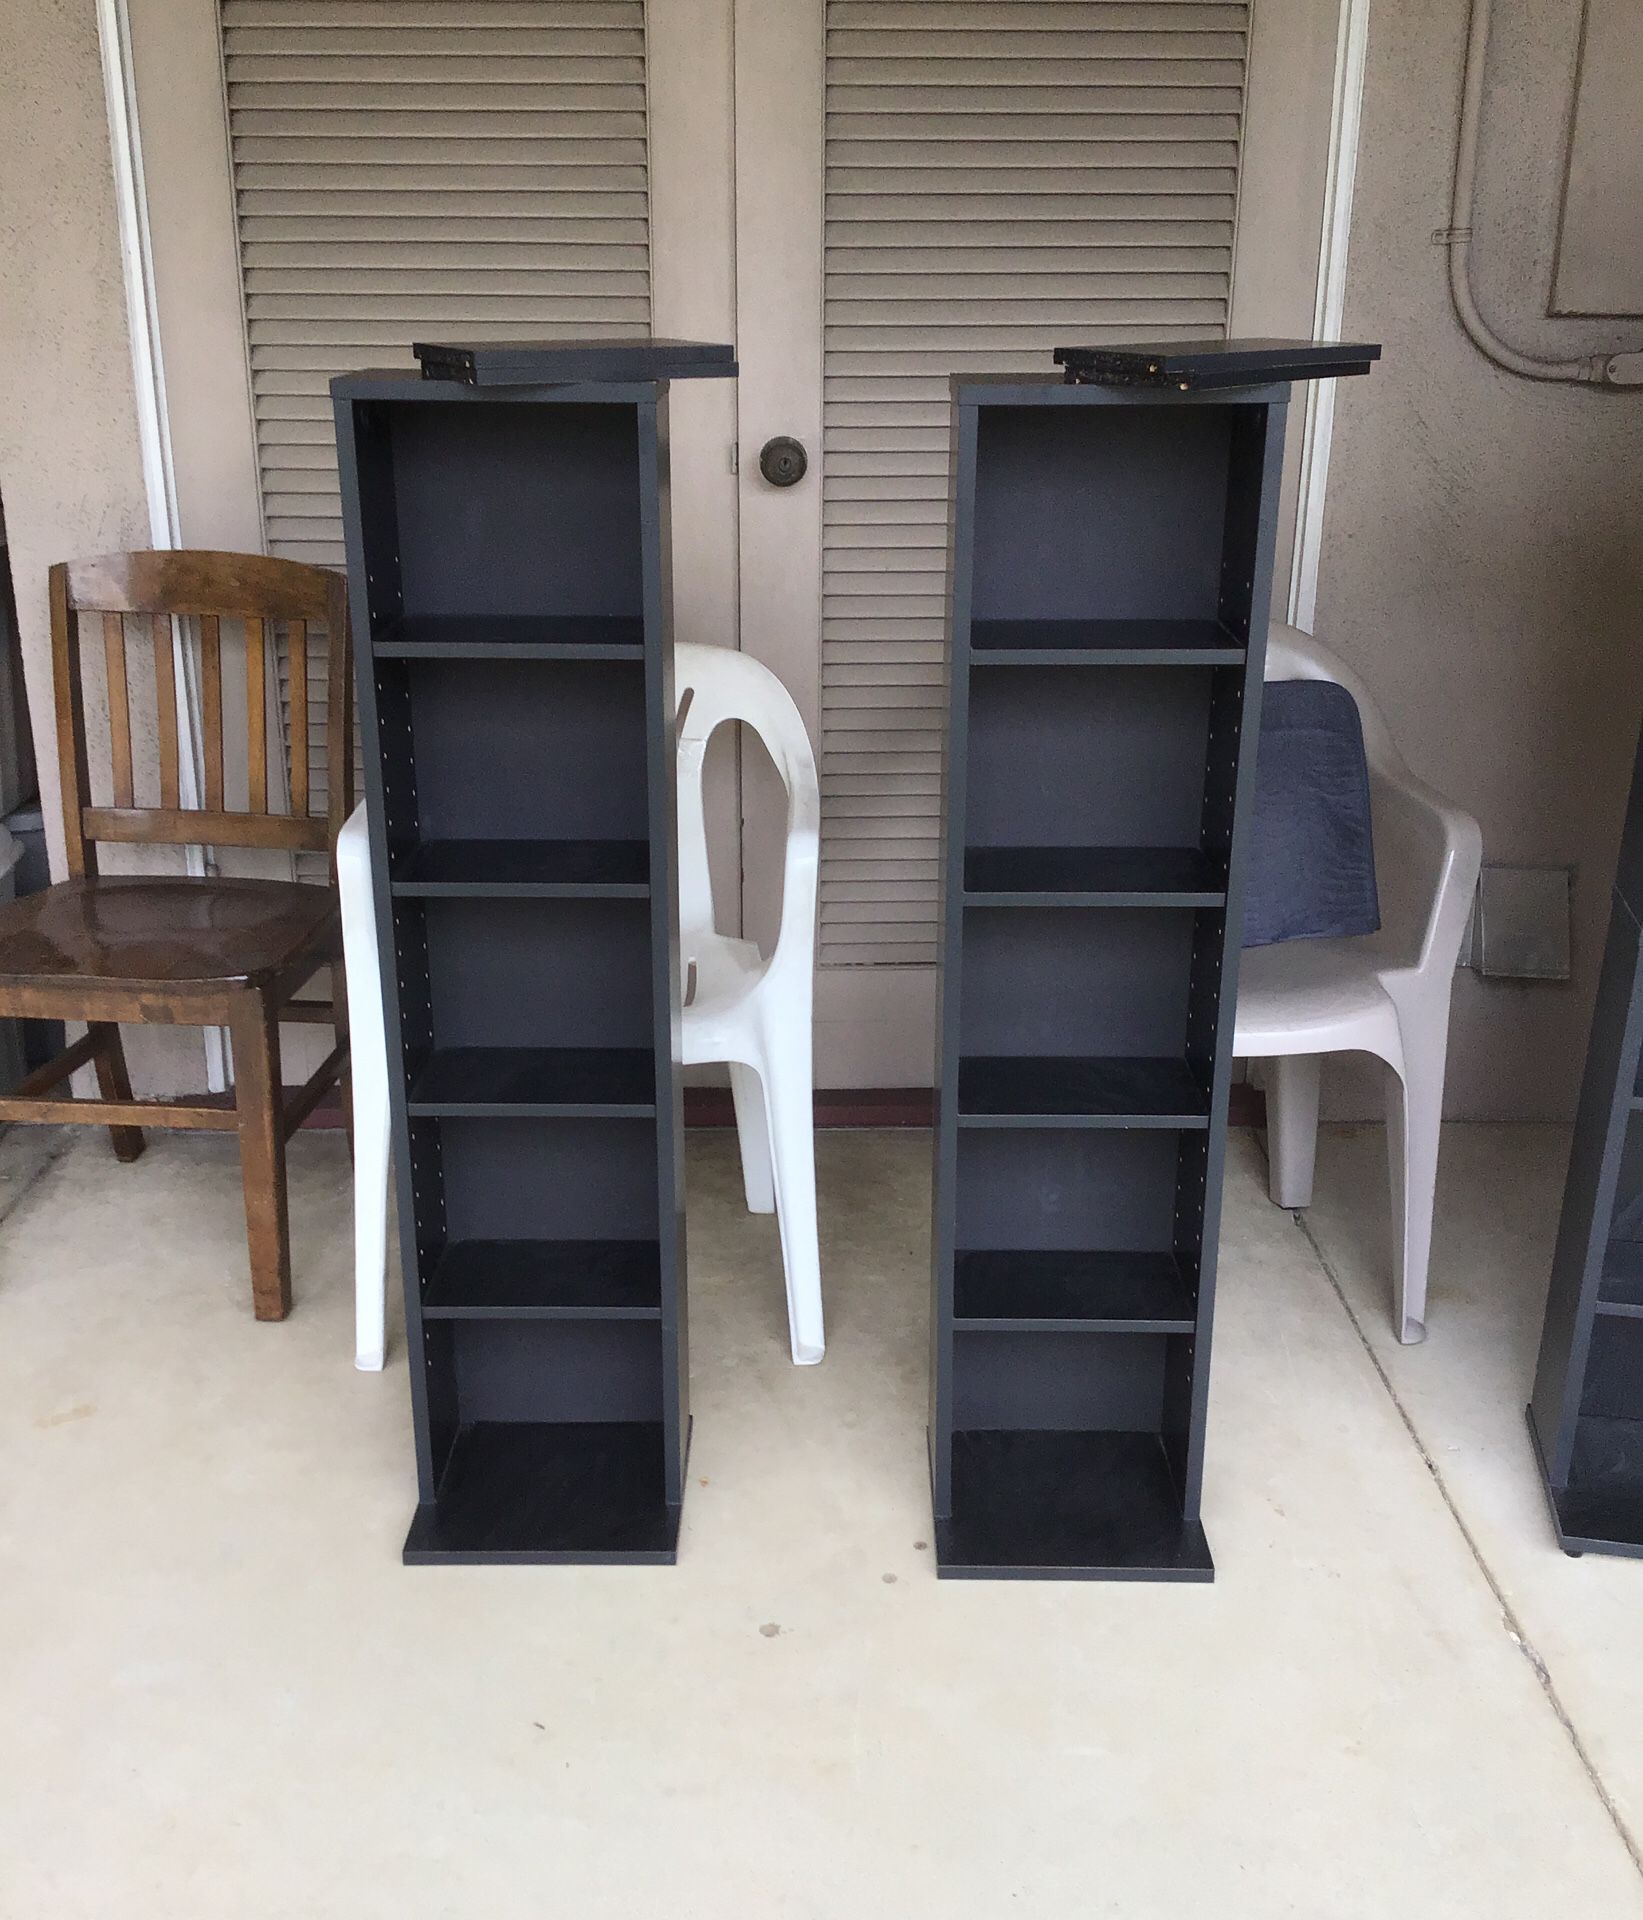 DVD / CD / Game / Media / Collector Display Shelf Shelves ($10 for one / $15 for both)